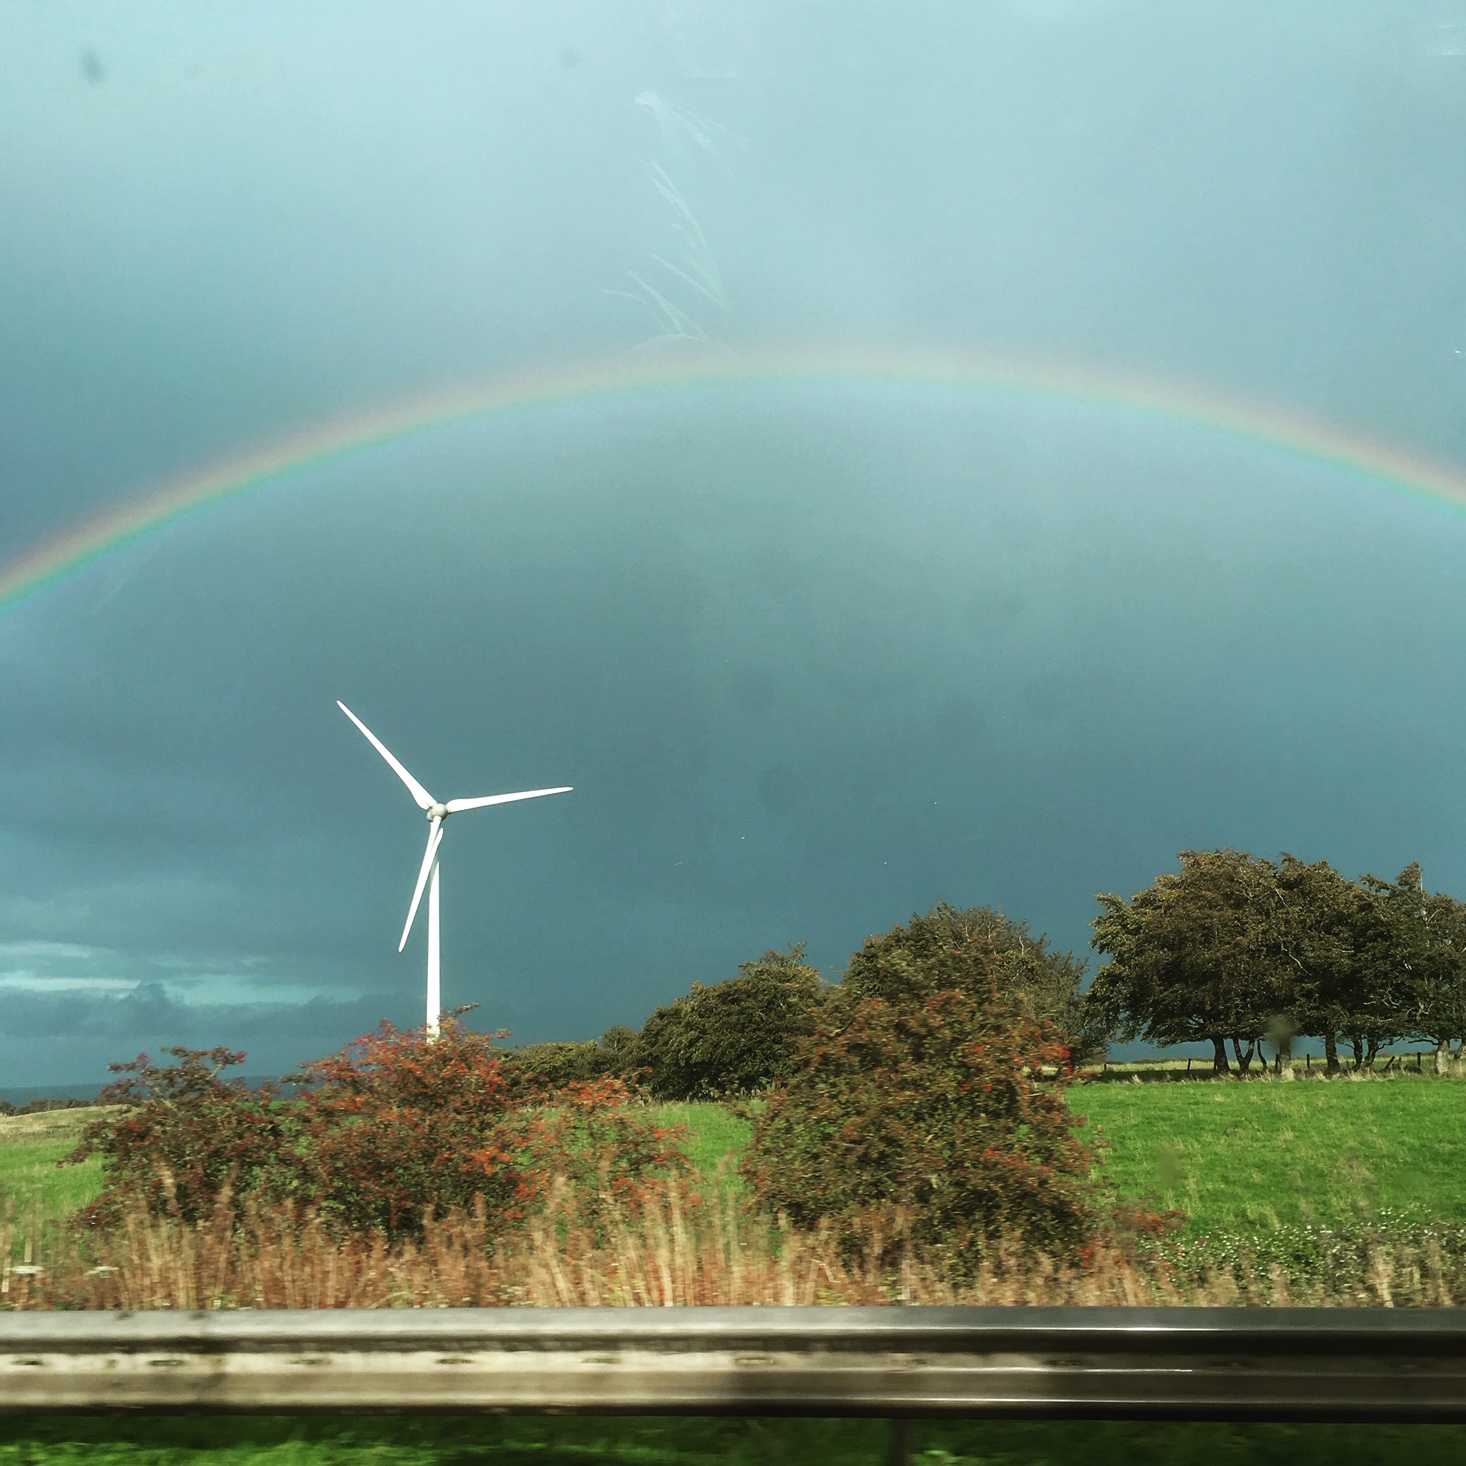 A single wind turbine on a hillside with a rainbow arching over it